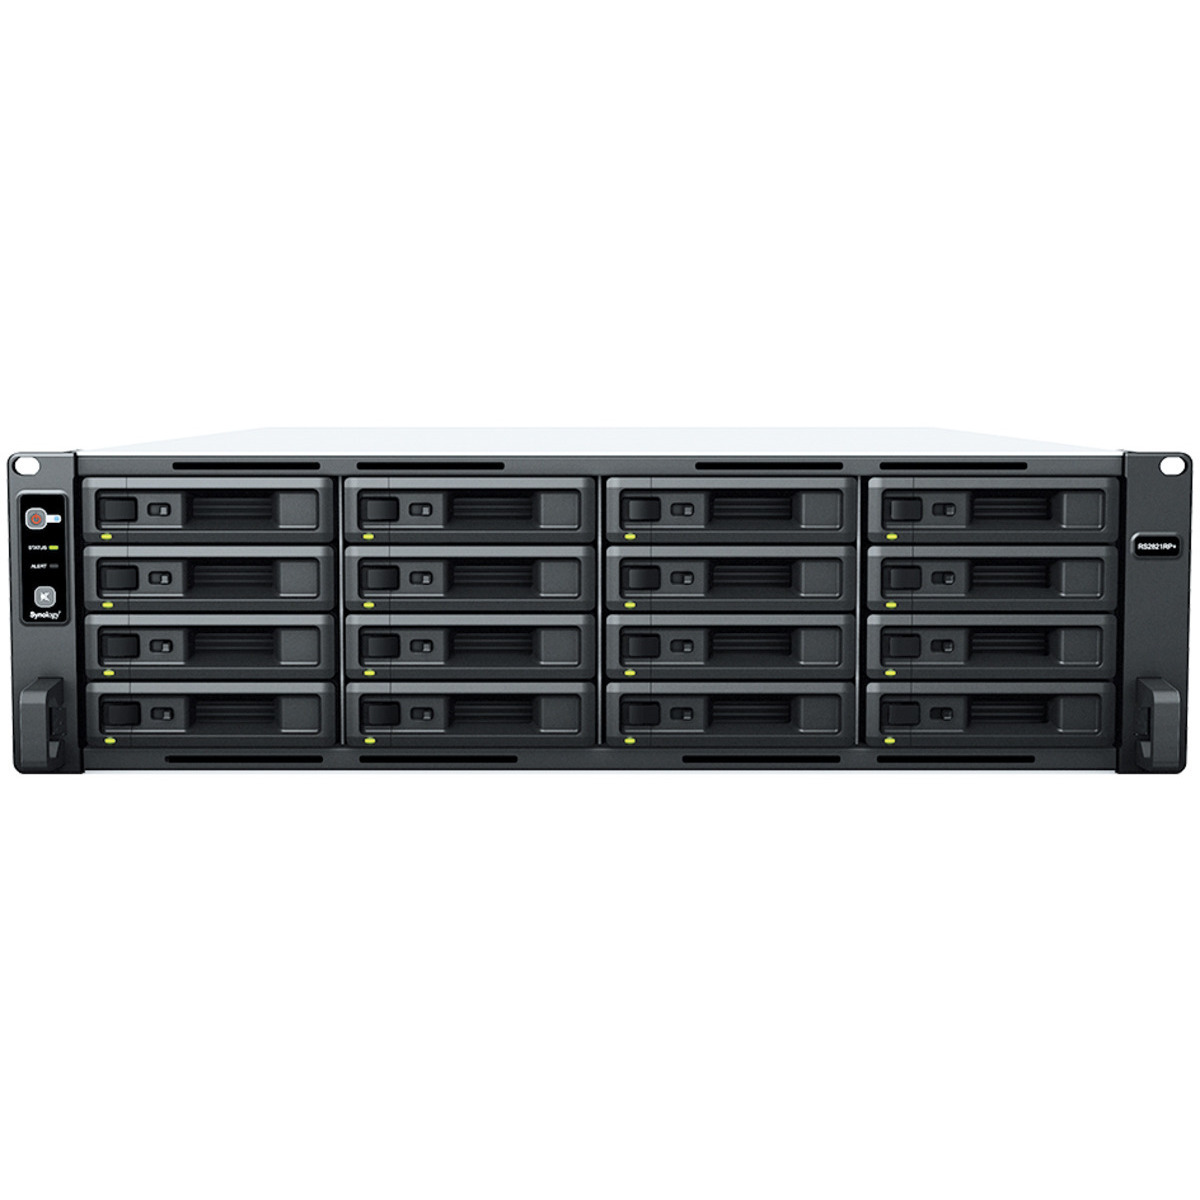 buy $8236 Synology RackStation RS2821RP+ 32tb RackMount NAS - Network Attached Storage Device 16x2000gb Western Digital Red SA500 WDS200T1R0A 2.5 SATA 6Gb/s SSD NAS Class Drives Installed - Burn-In Tested - nas headquarters buy network attached storage server device das new raid-5 free shipping usa RackStation RS2821RP+